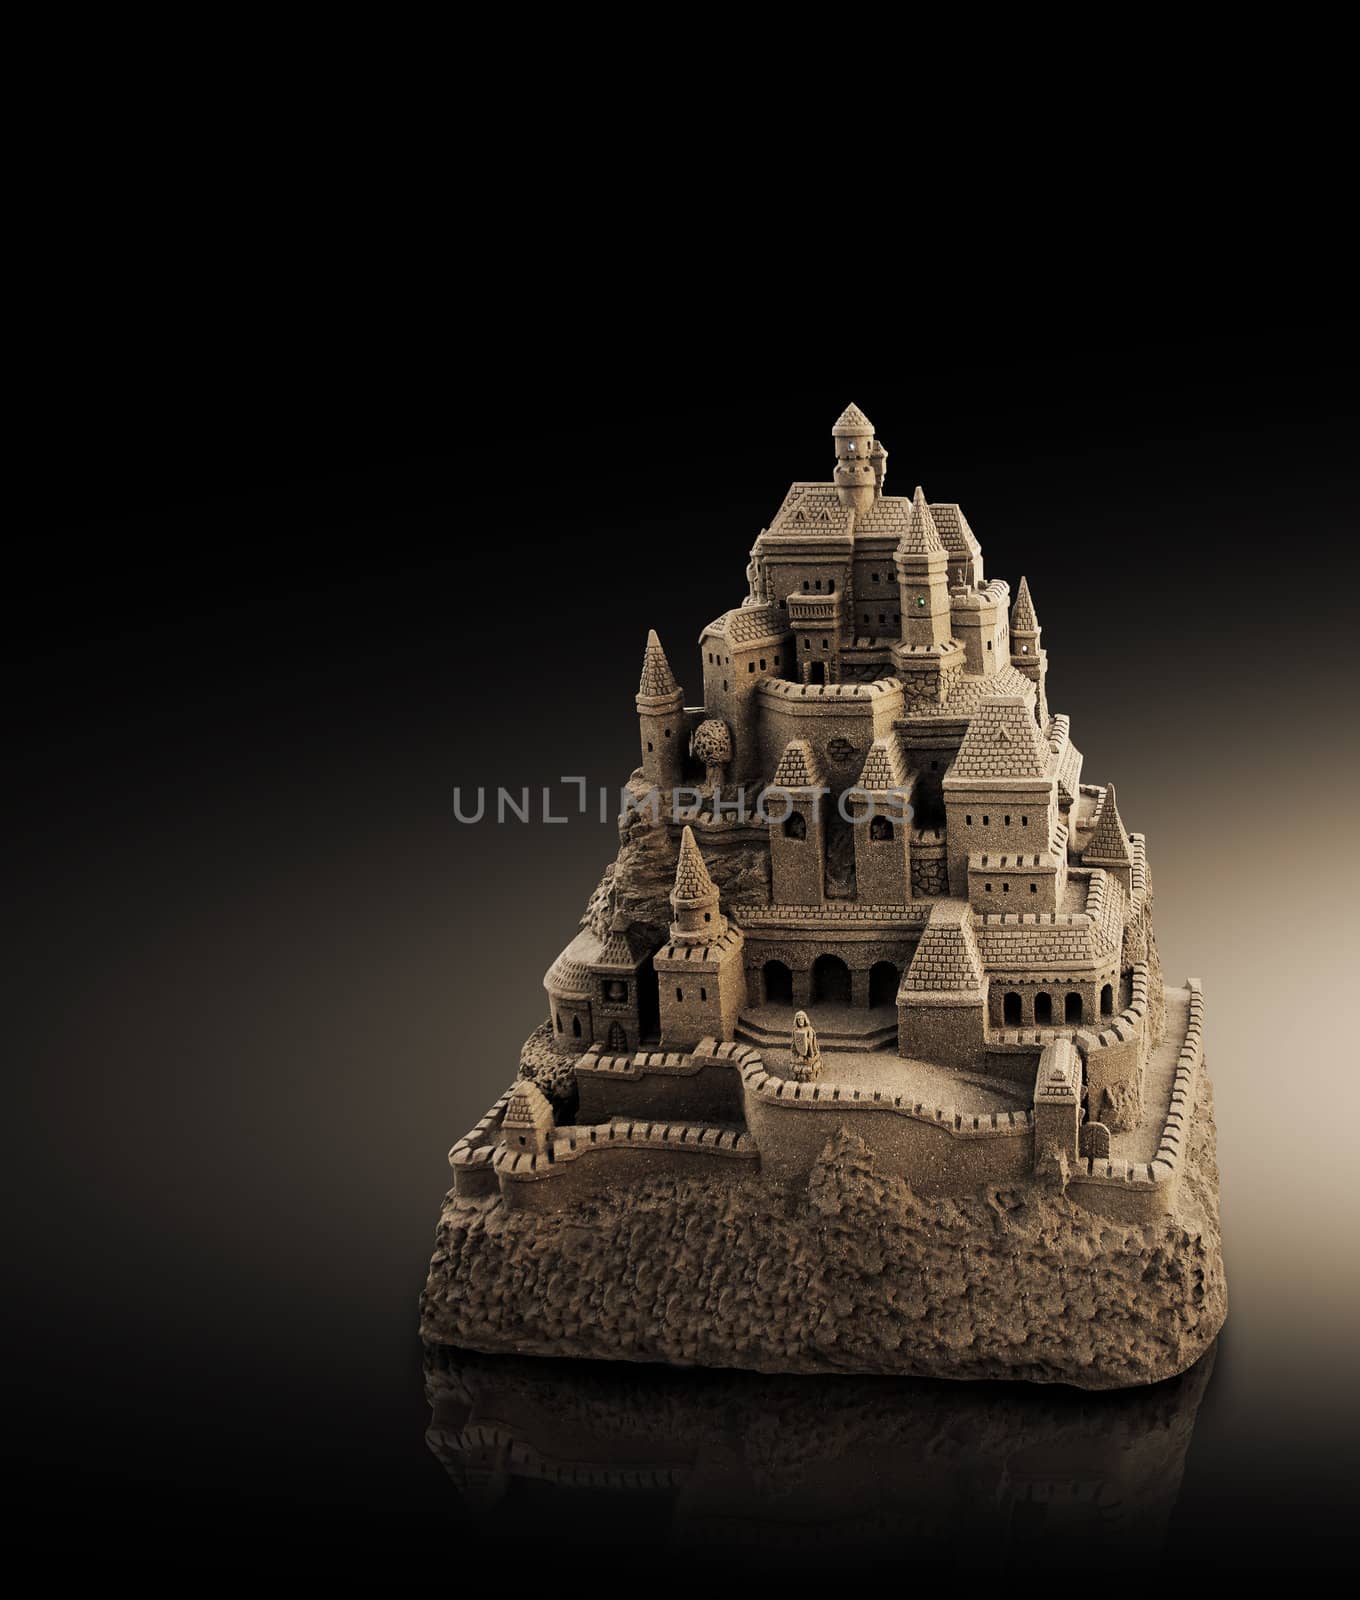 large sandcastle with many towers and crenels in retro look